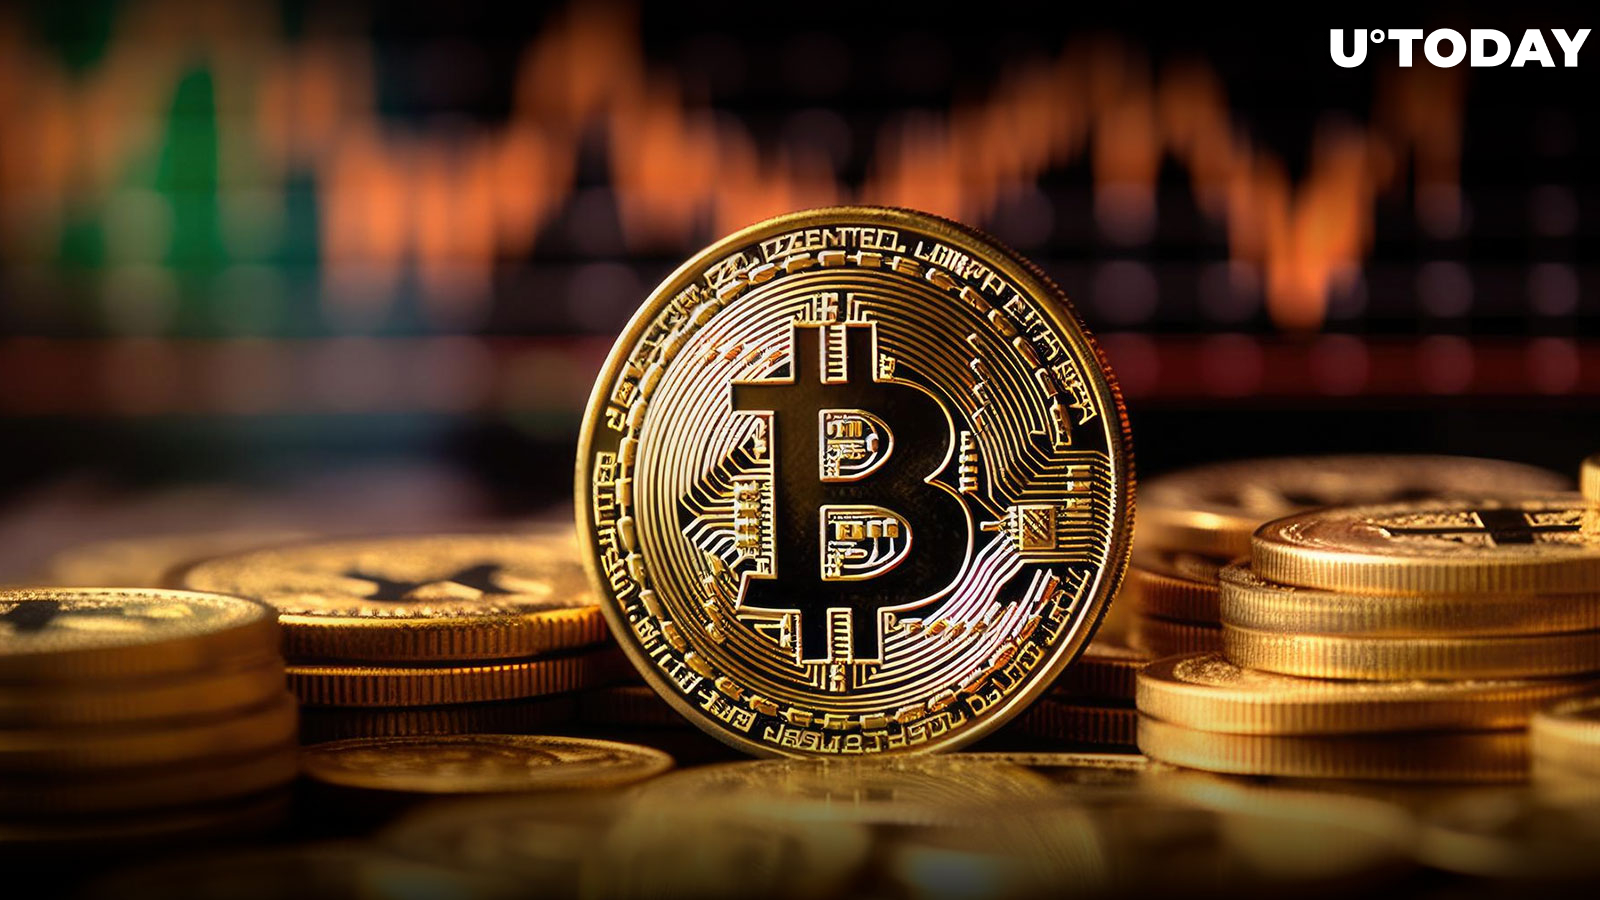 Bitcoin (BTC) Price Set to Hit $40K After Dip, Wolfe Research Says